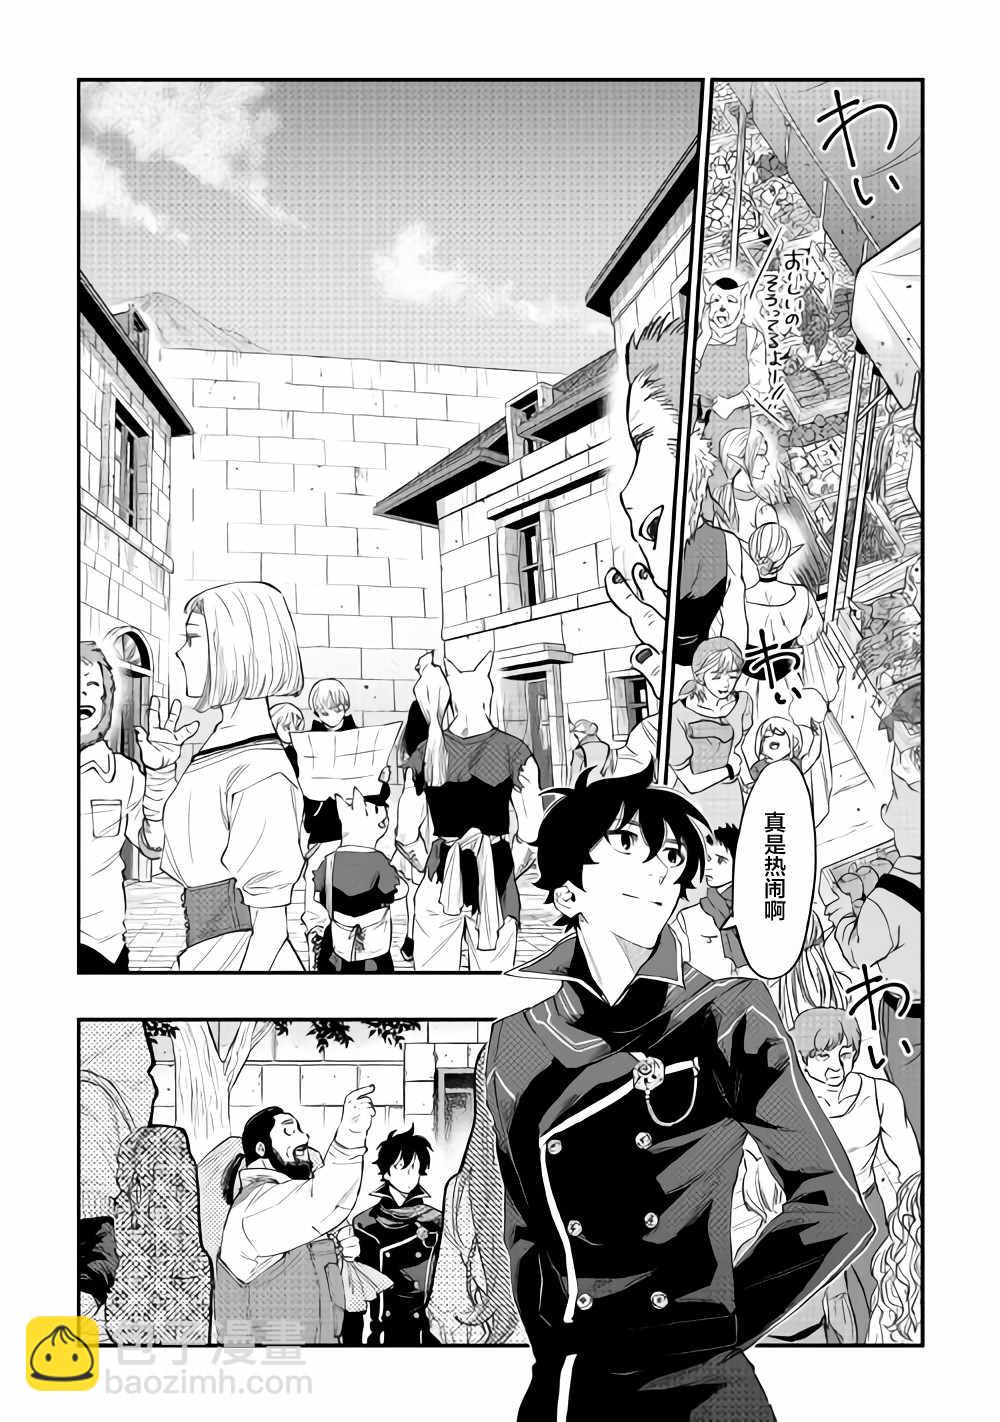 The New Gate - 第46話 - 5